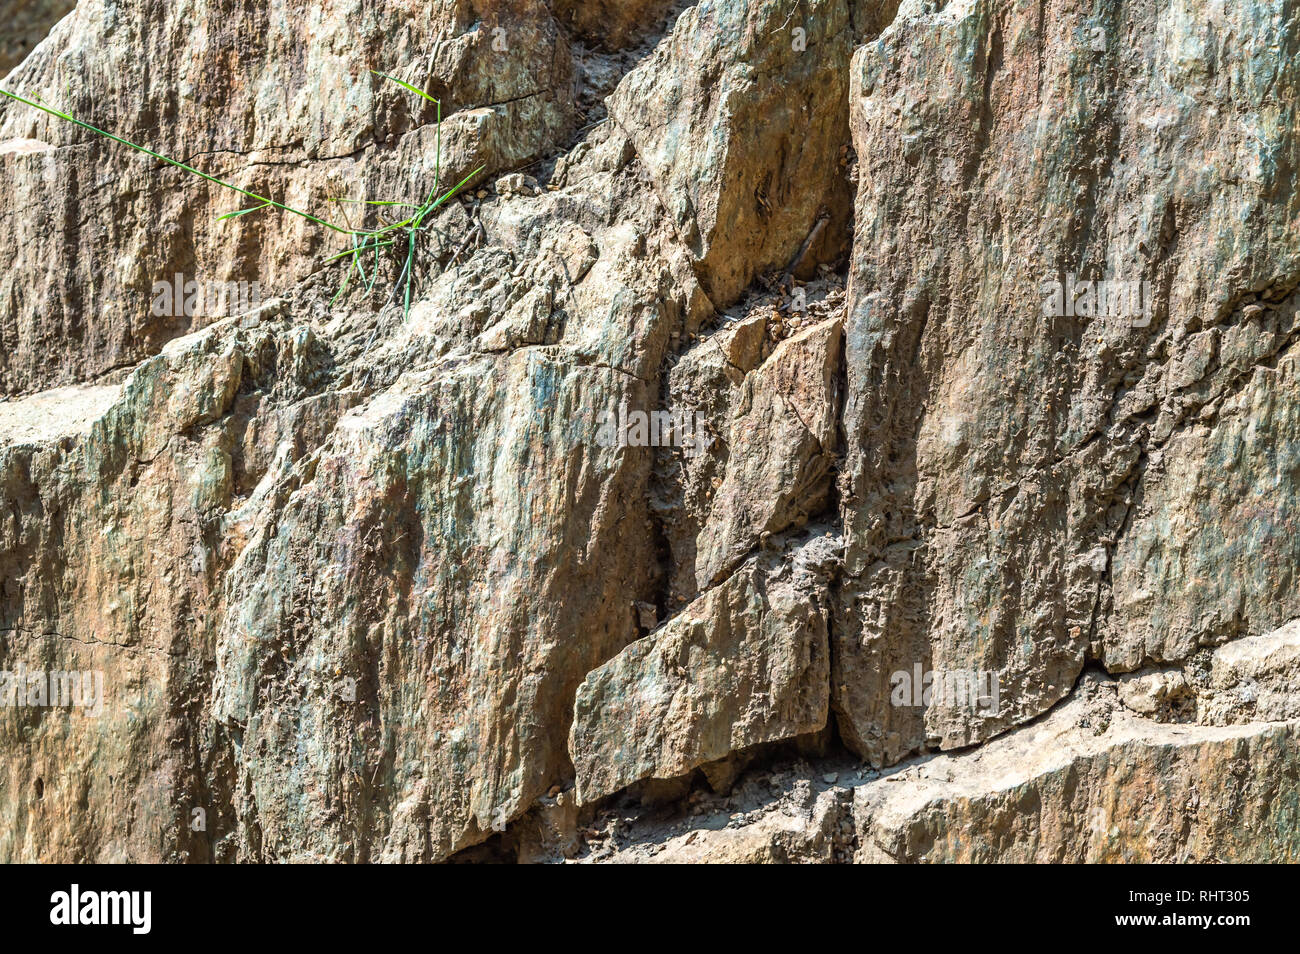 A rock wall mountain face with cracks and great details and texture Stock Photo